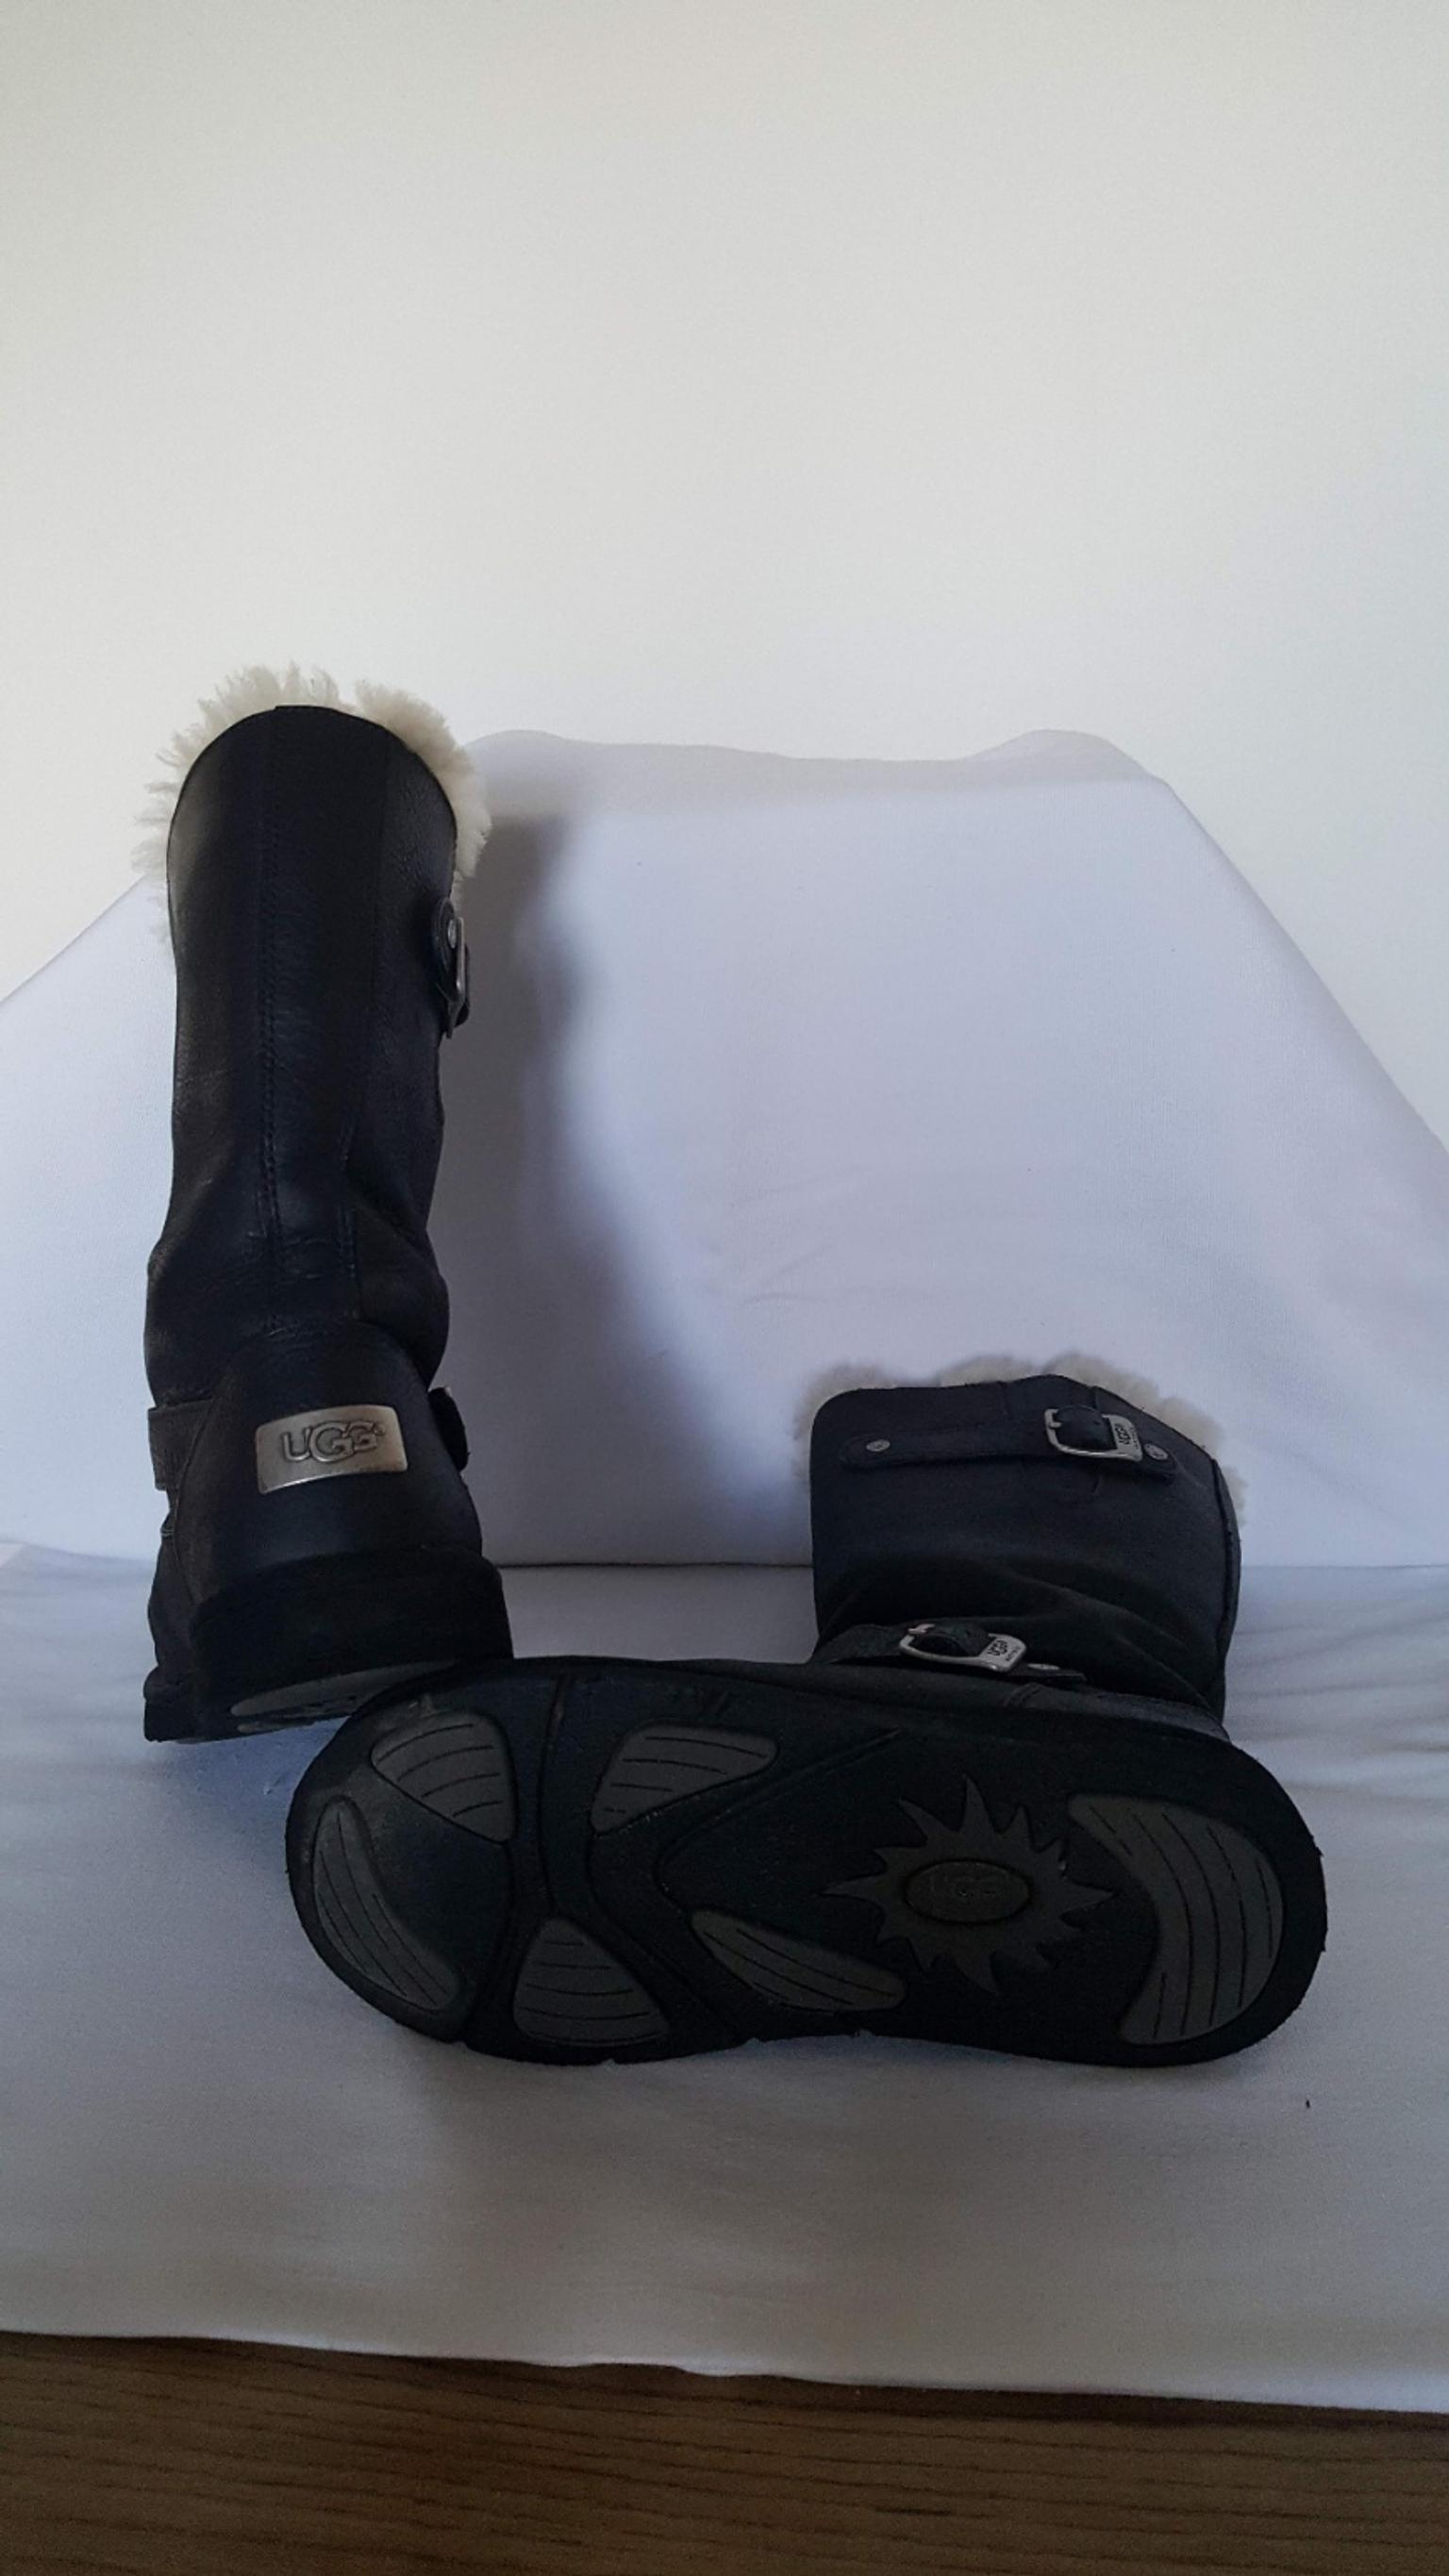 ladies ugg boots size 6.5